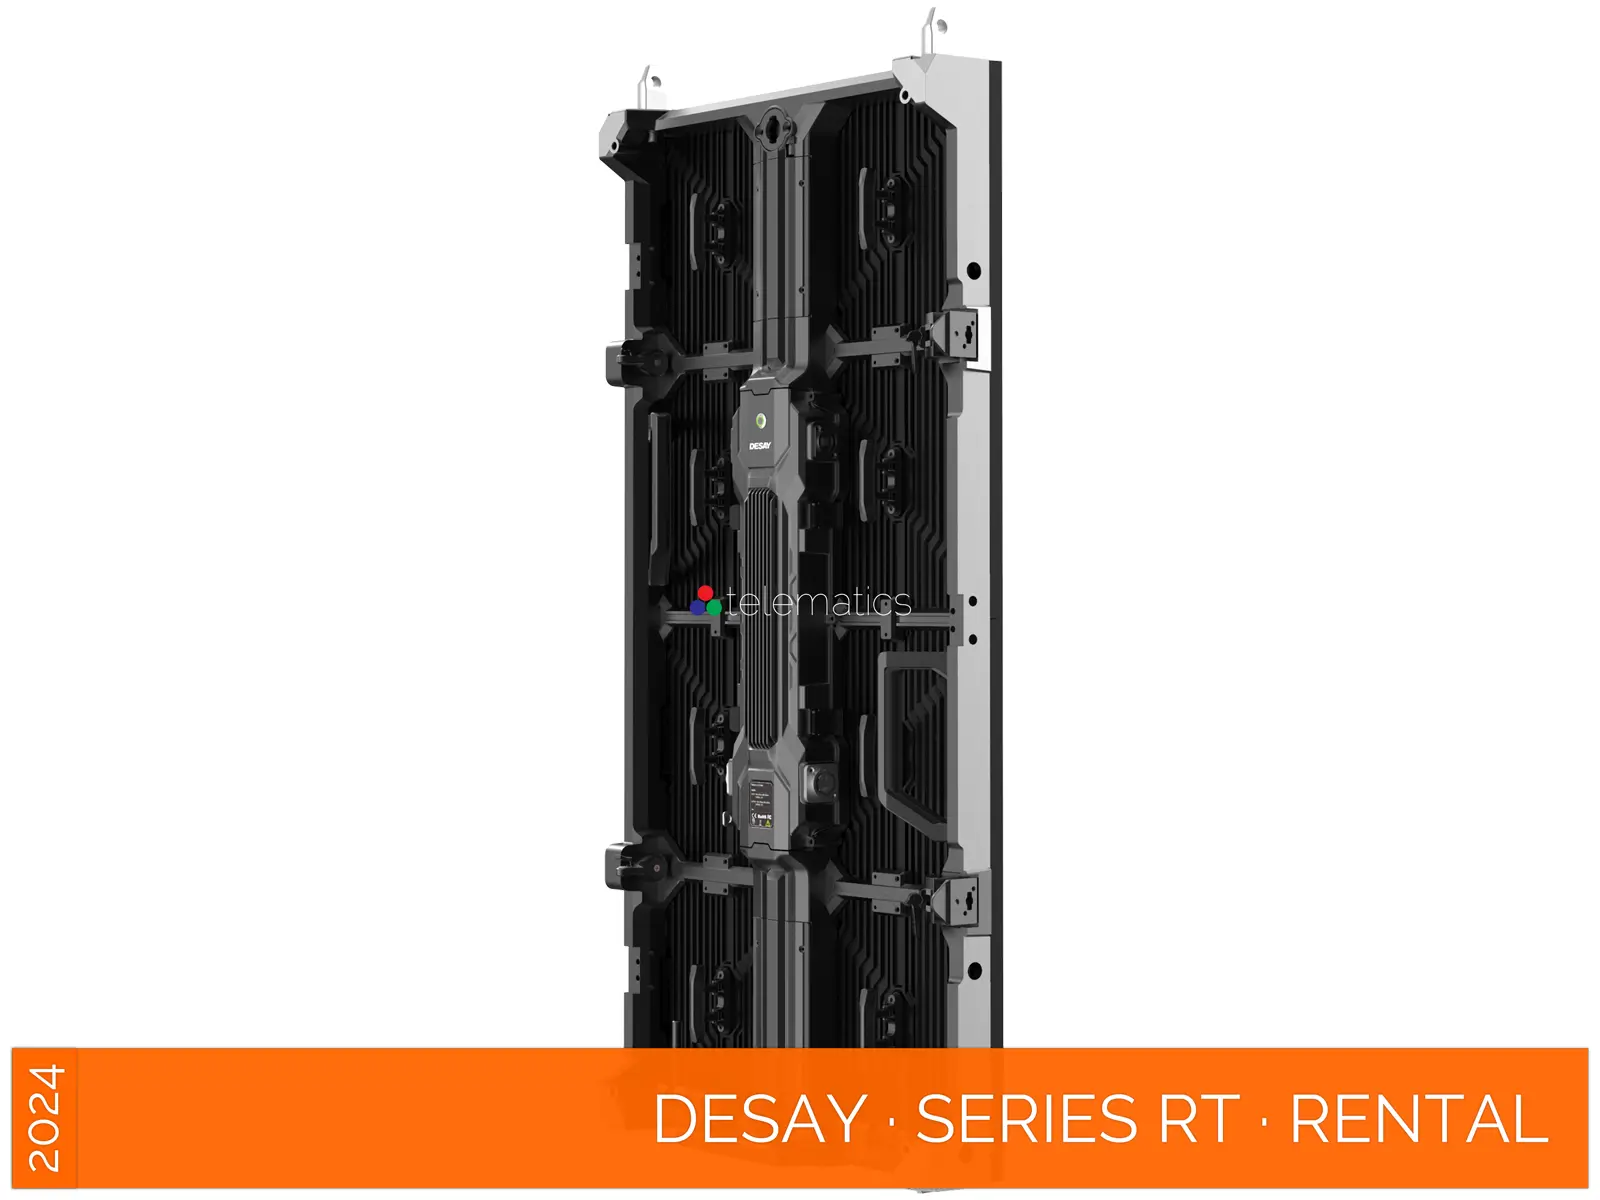 Desay · Series RT · Direct View LED Display Panel · Full Pixel Range · Rental Or Touring · Outdoor Rated · Rapid Service And Setup · Rugged Build For Rental Use · NovaStar COEX MX CX · Vision Management Platform · Viplex · review · price · cost · priced from $1,790 per square meter